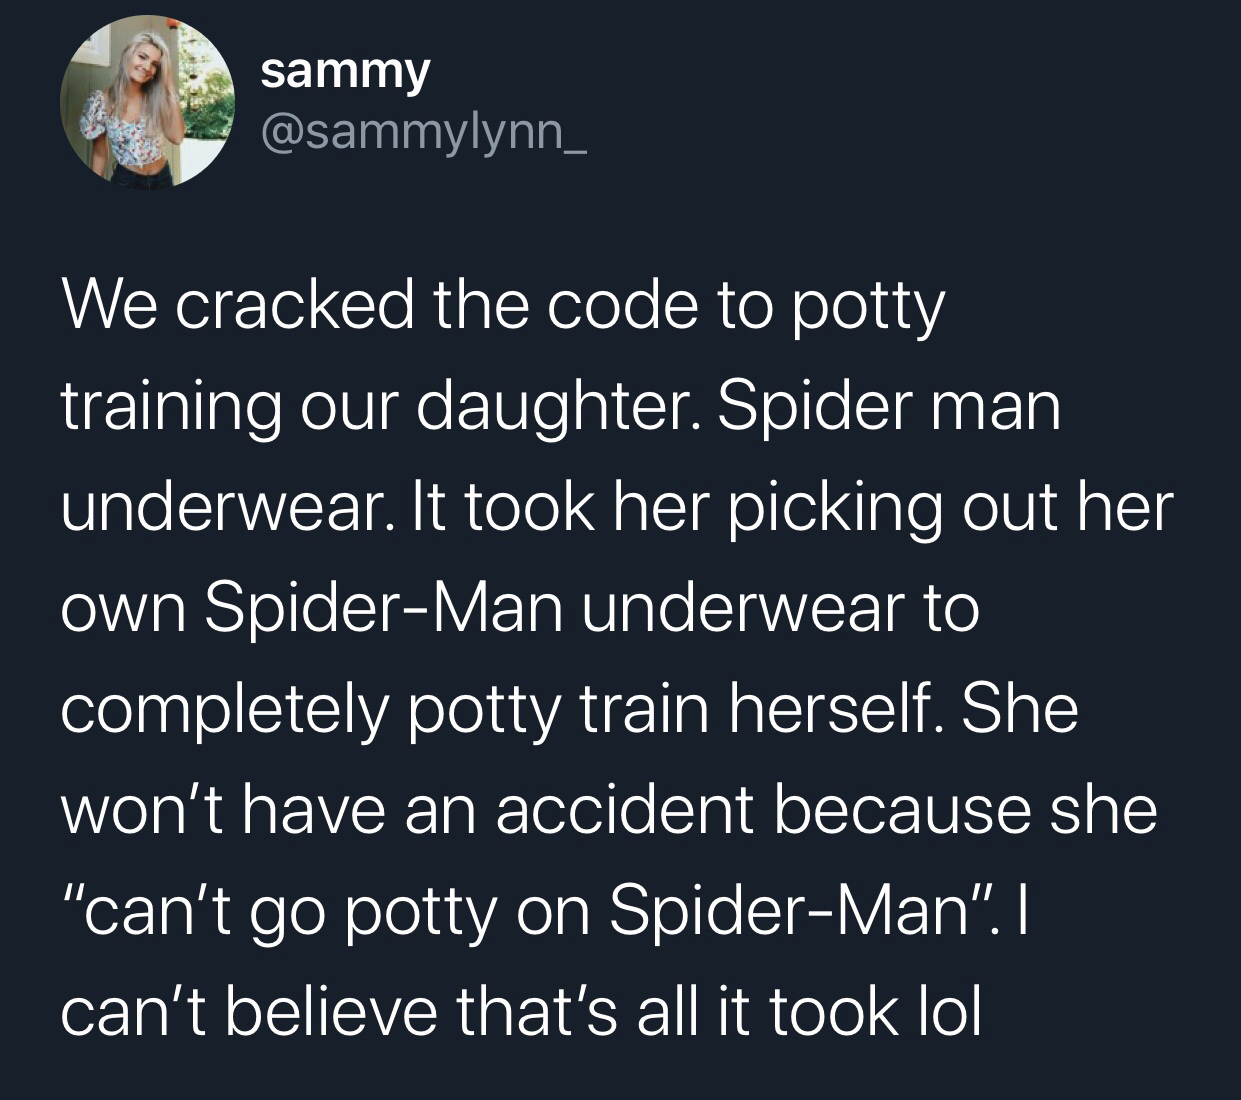 angle - sammy We cracked the code to potty training our daughter. Spider man underwear. It took her picking out her own SpiderMan underwear to completely potty train herself. She won't have an accident because she "can't go potty on SpiderMan".|| can't be